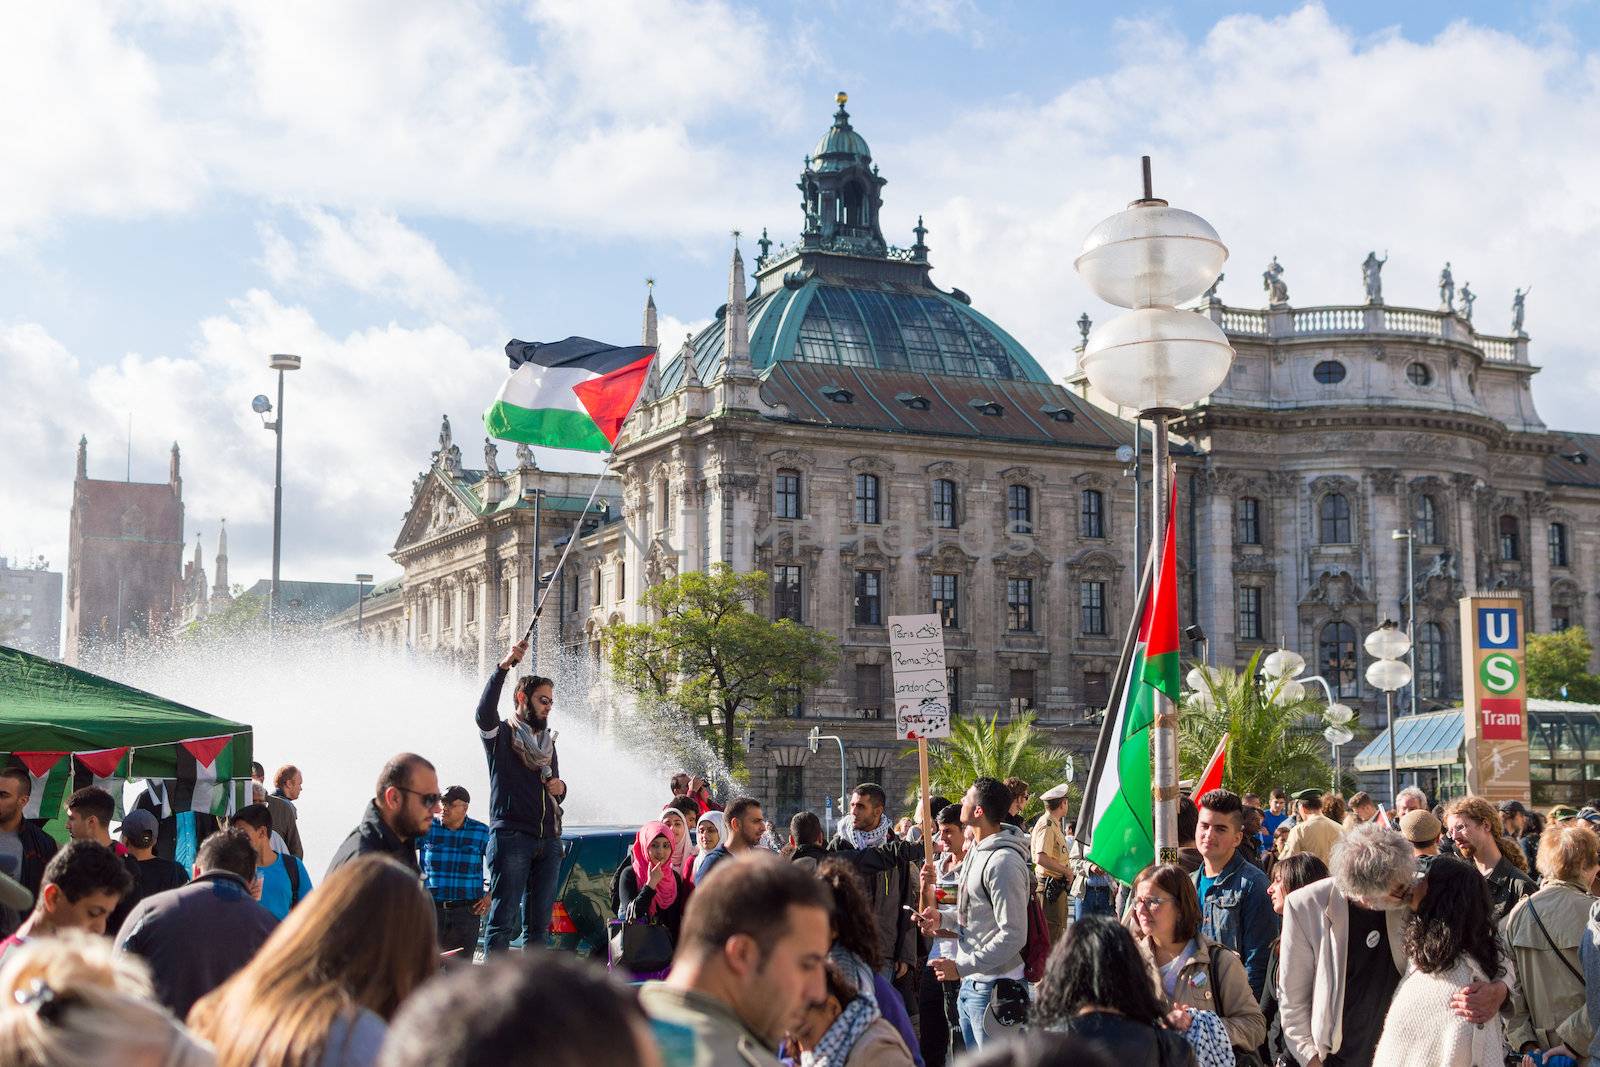 MUNICH, GERMANY - AUGUST 16, 2014: Demonstration in support of Palestine in the center of Europe. European activists demand the cessation of hostilities in Gaza Strip.